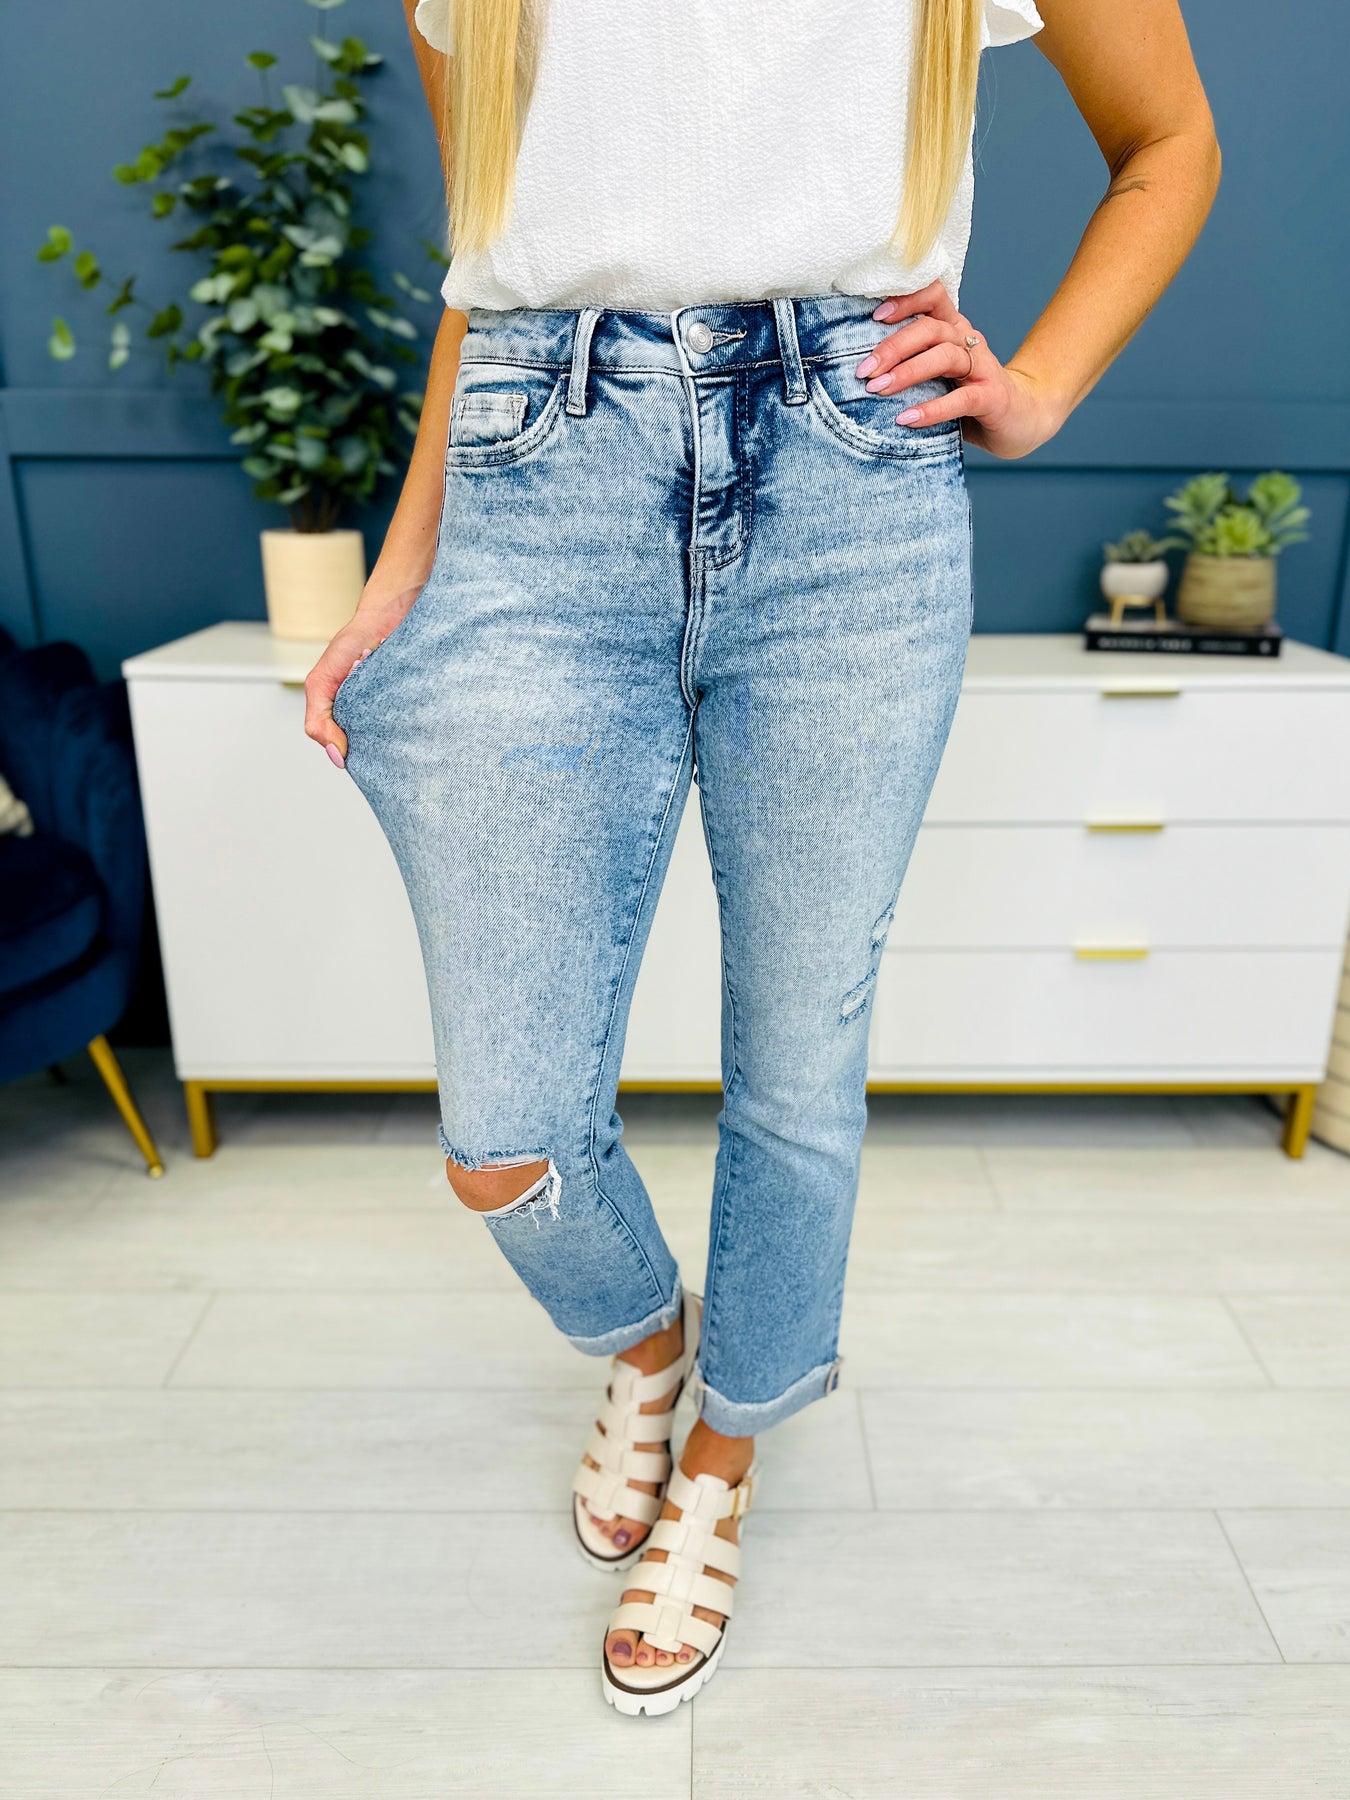 I Am Denim - Love Your Tummy ❤️ Love Our Jeans 👖 Tummy Control